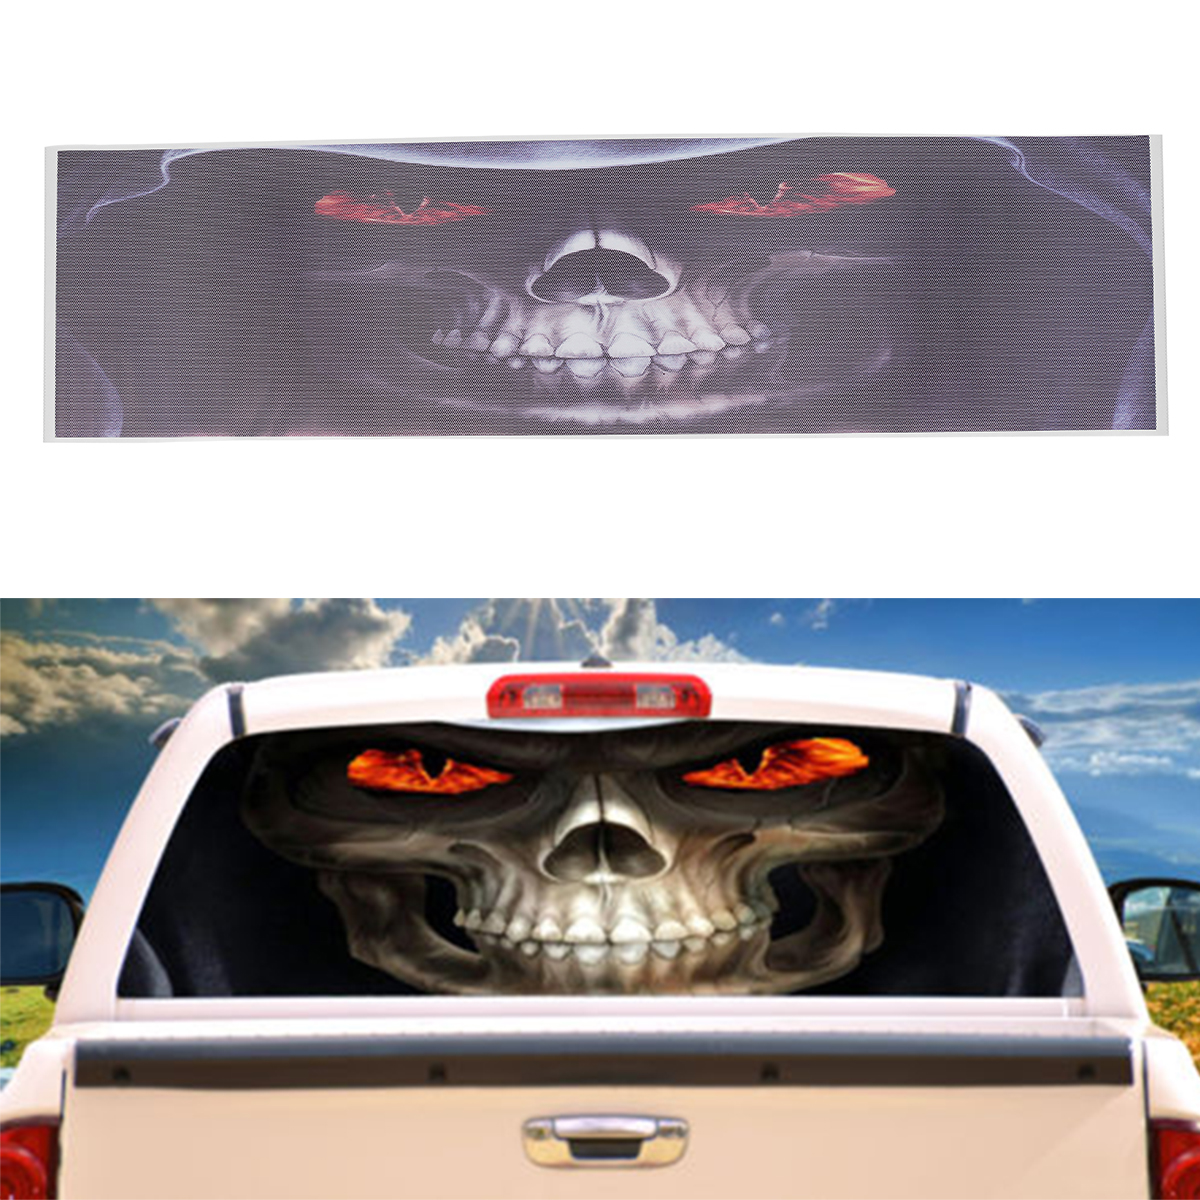 

Grim Reaper Death Car Rear Window Graphic Decal Stickers for Truck Suv Van